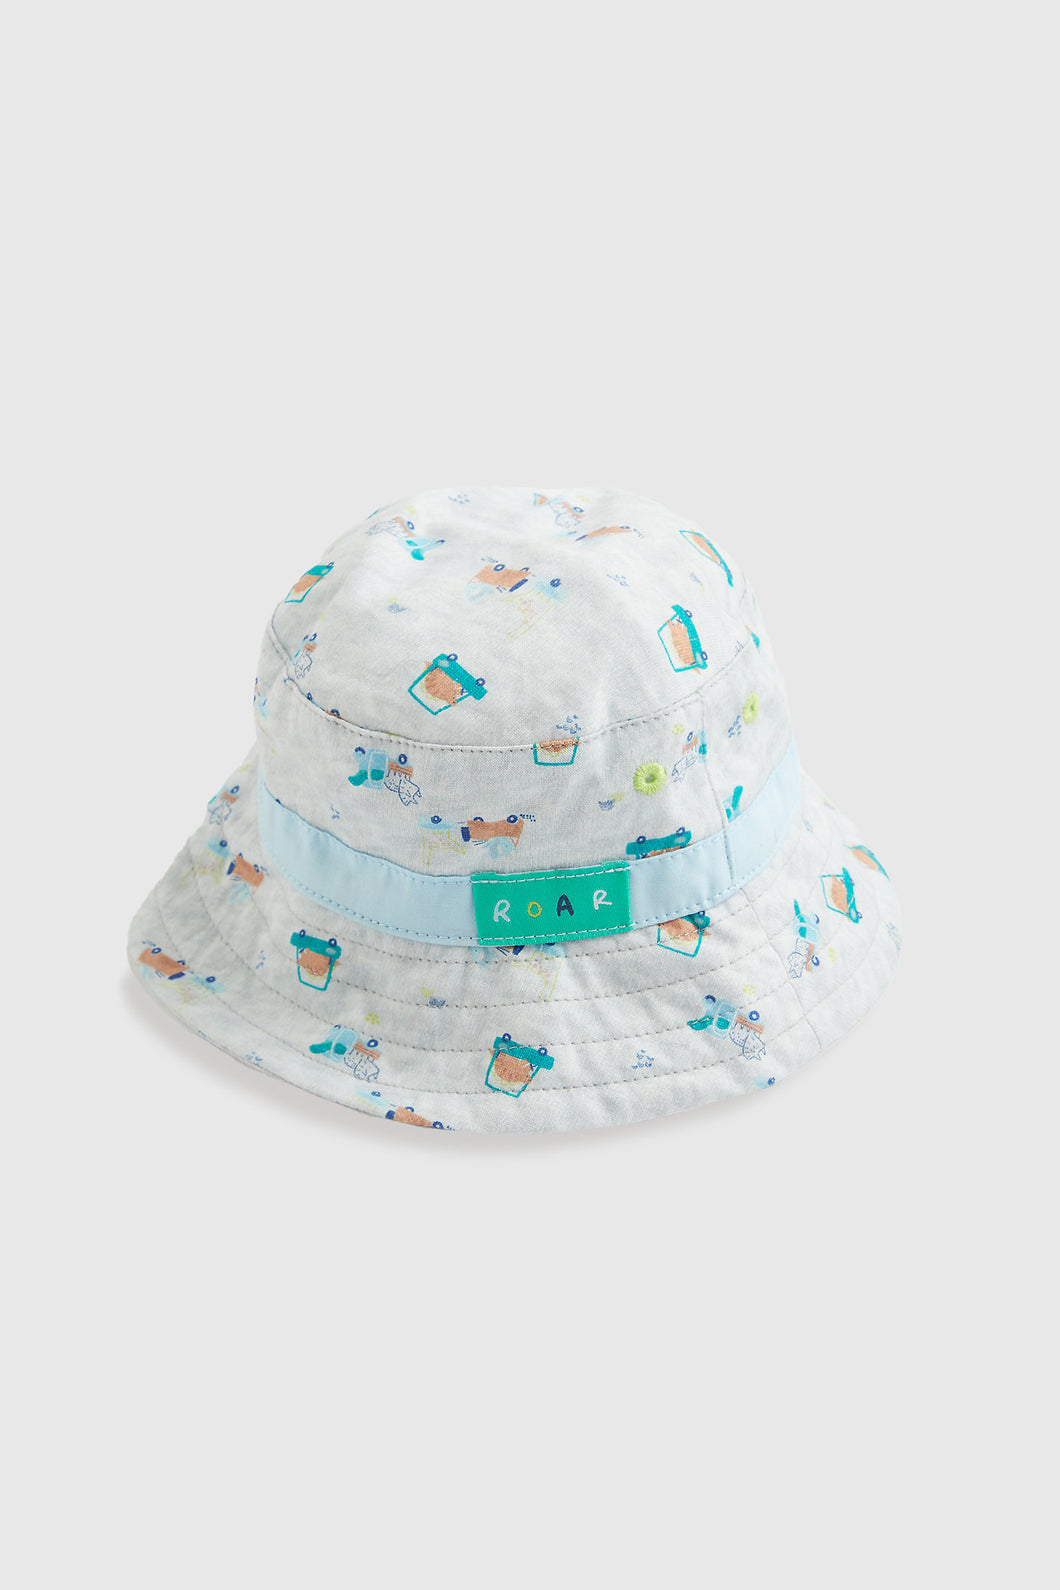 Mothercare Cars Sunsafe Baby Fisherman Hat